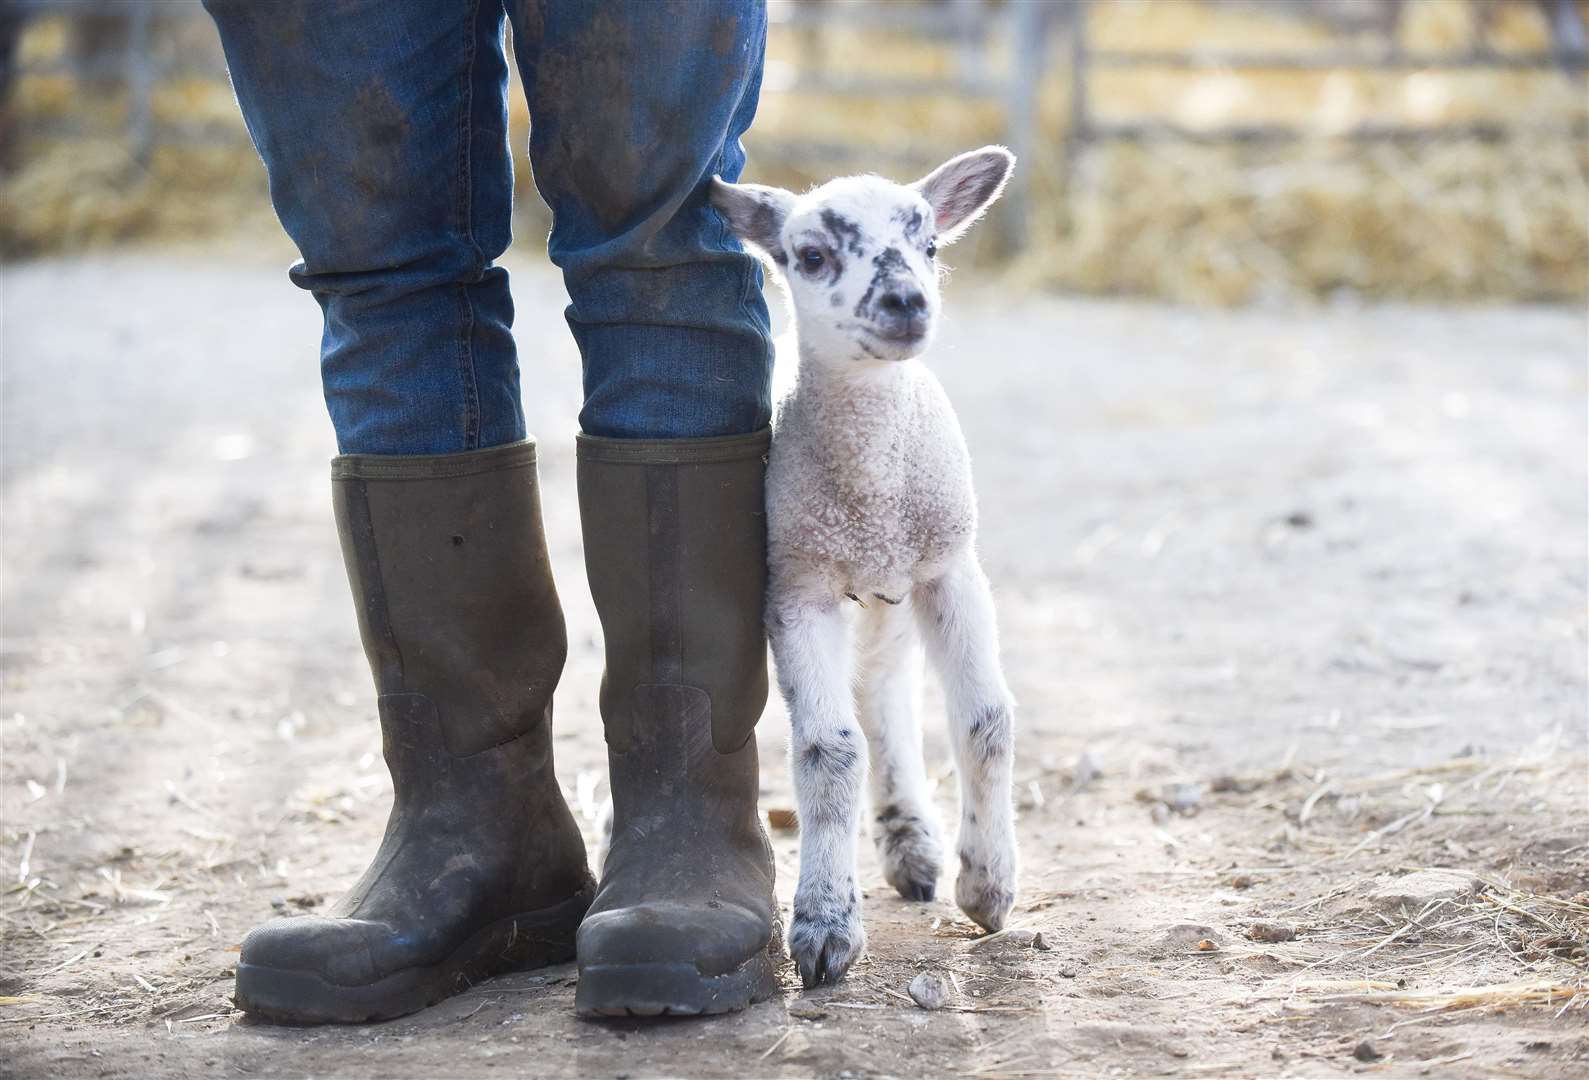 Farms will soon be in the midst of lambing season